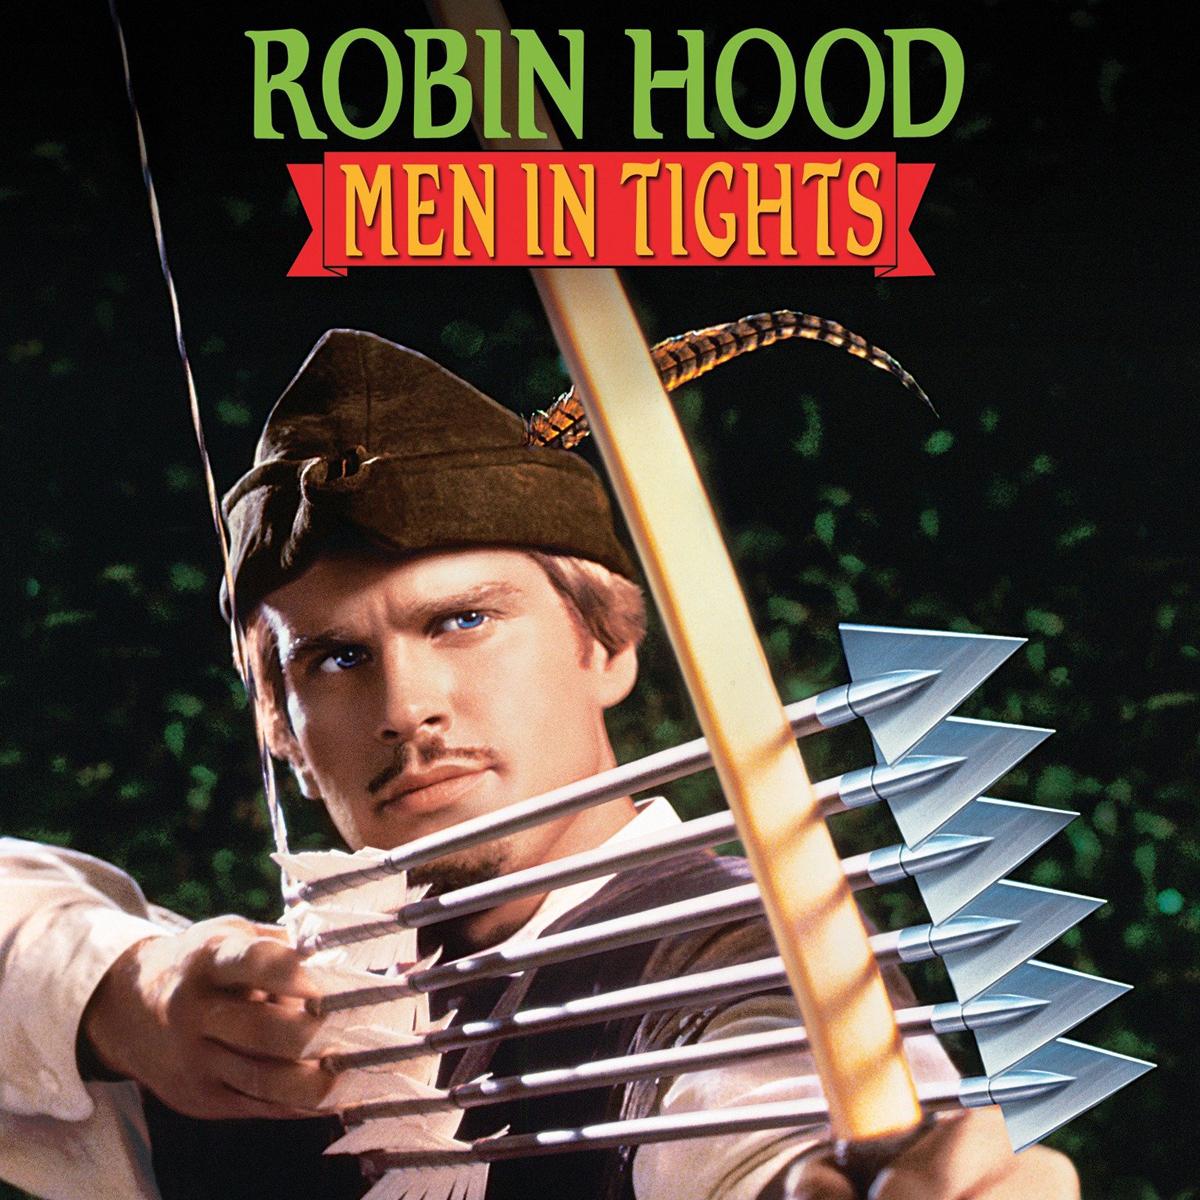 Robin Hood Men In Tights Movie for Free